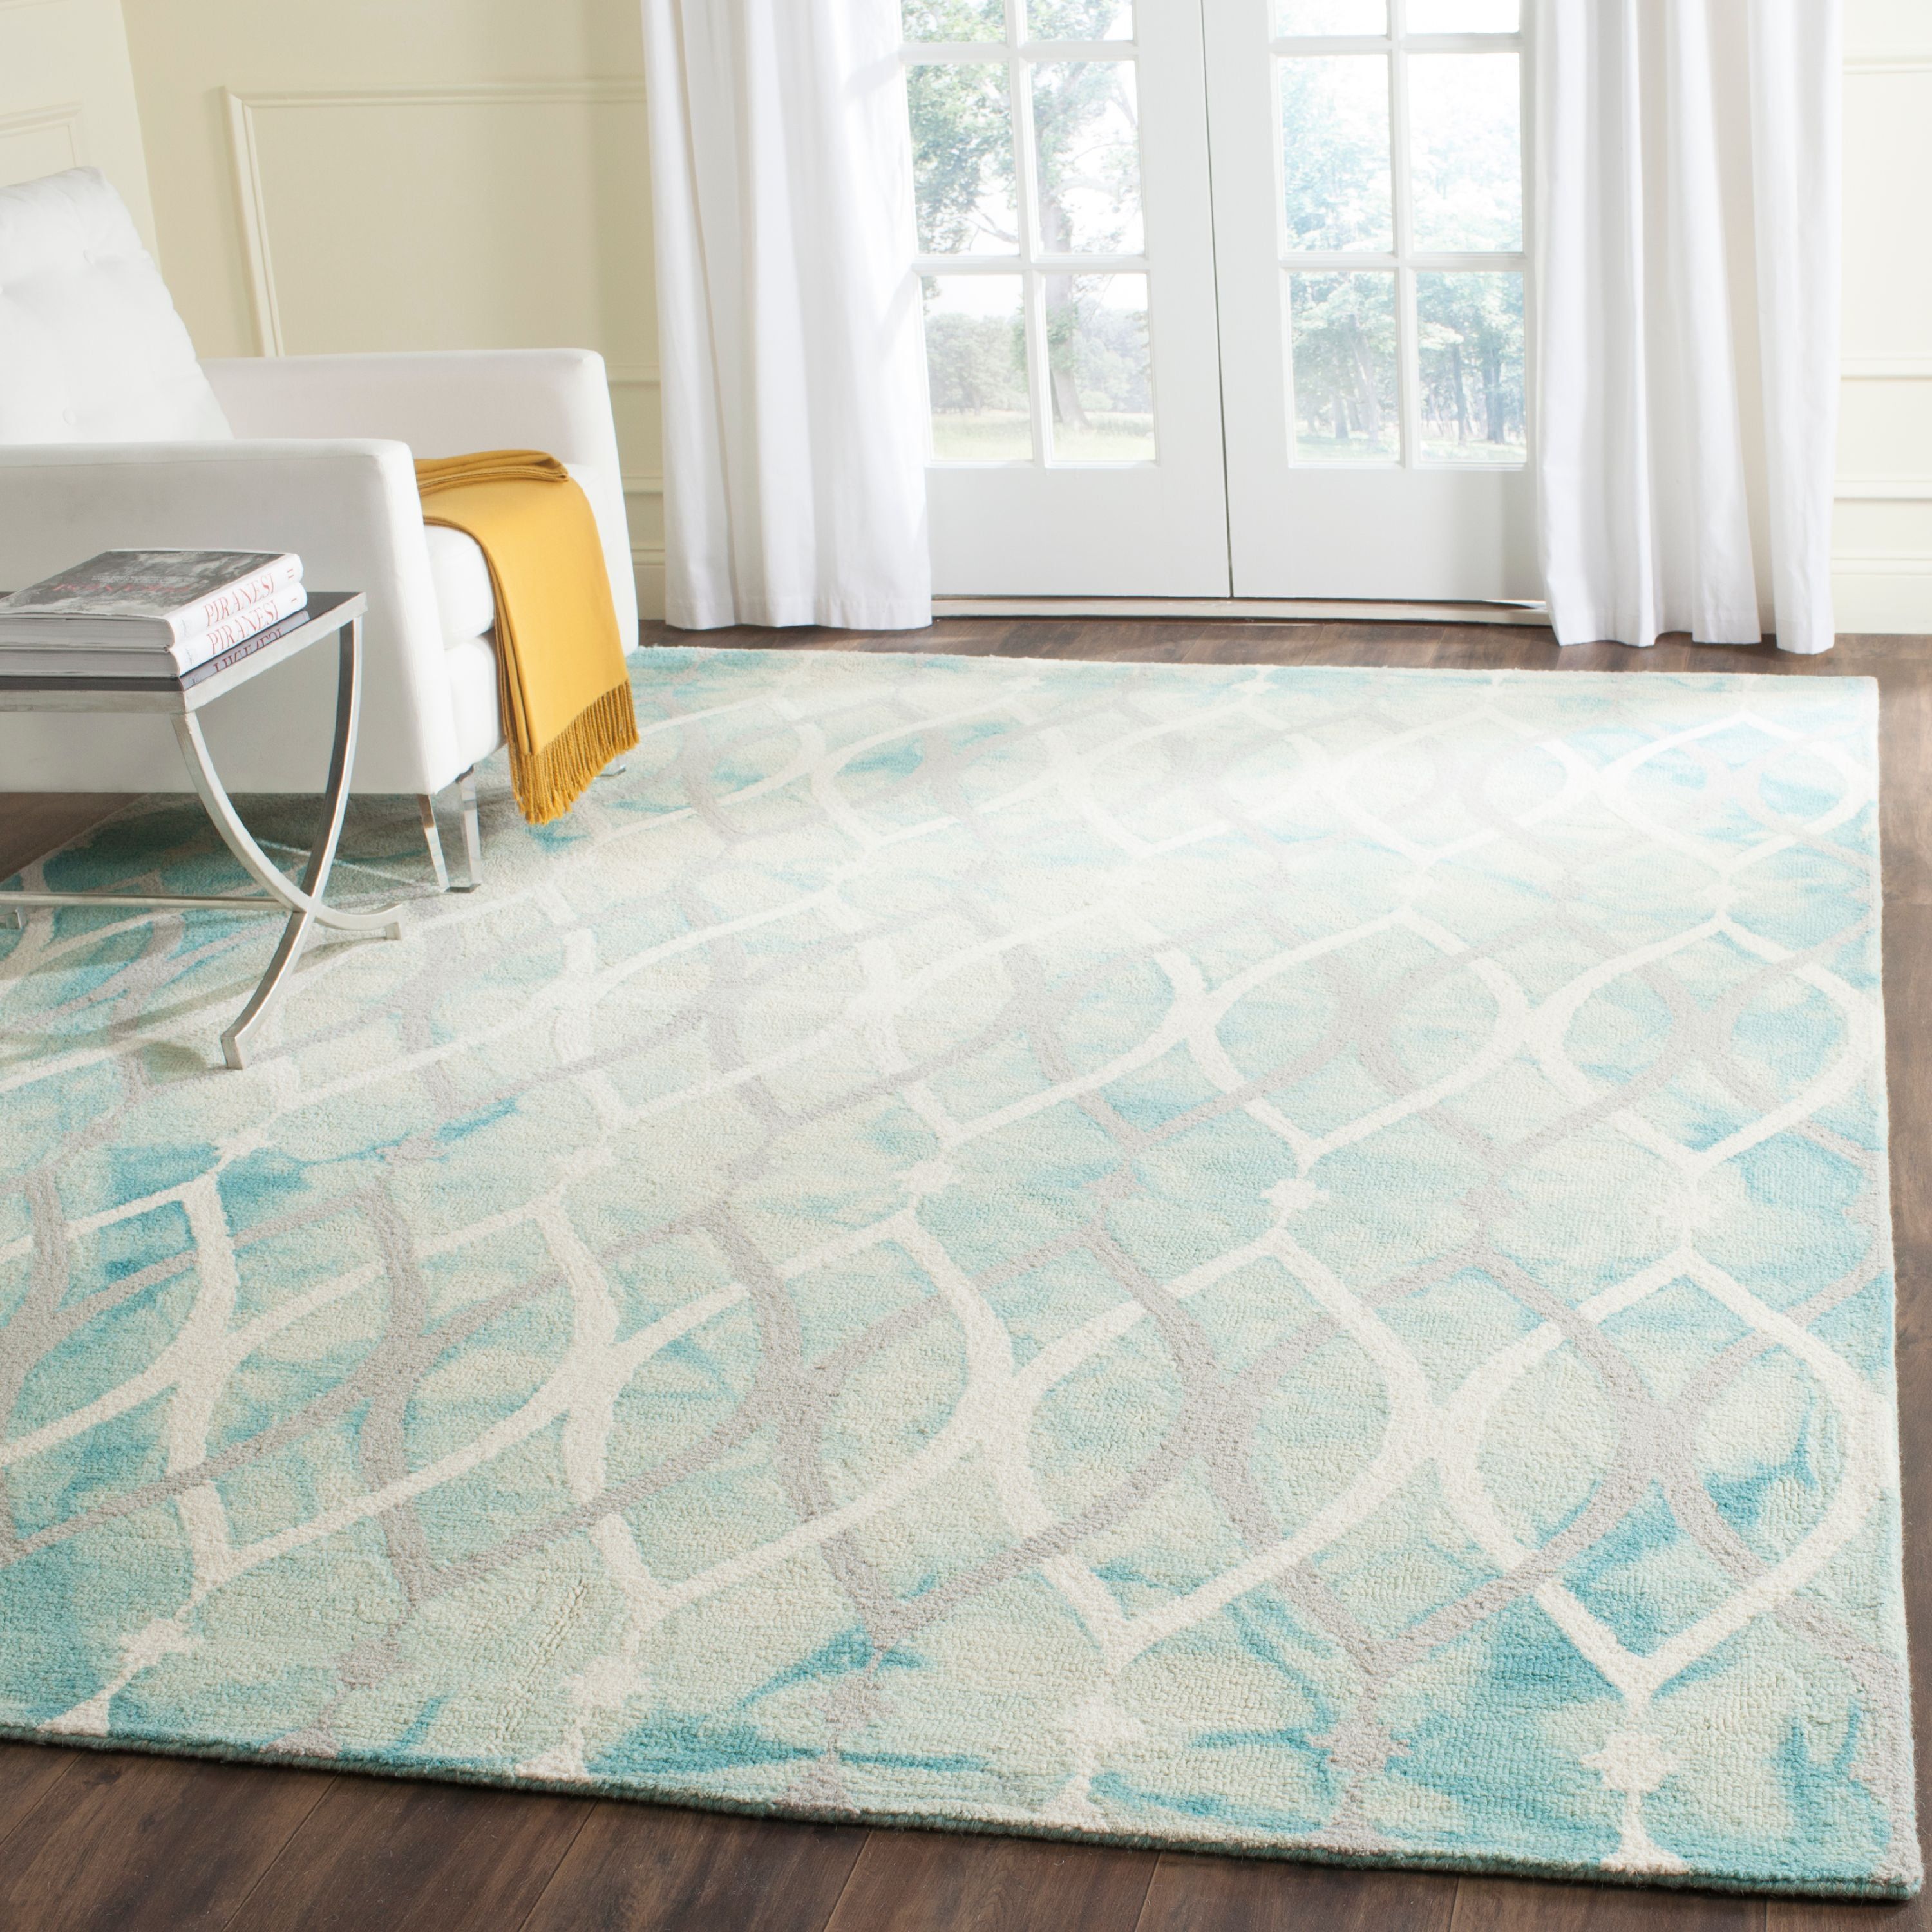 Elysian Green and Ivory Hand-Tufted Wool Area Rug, 10' x 14'